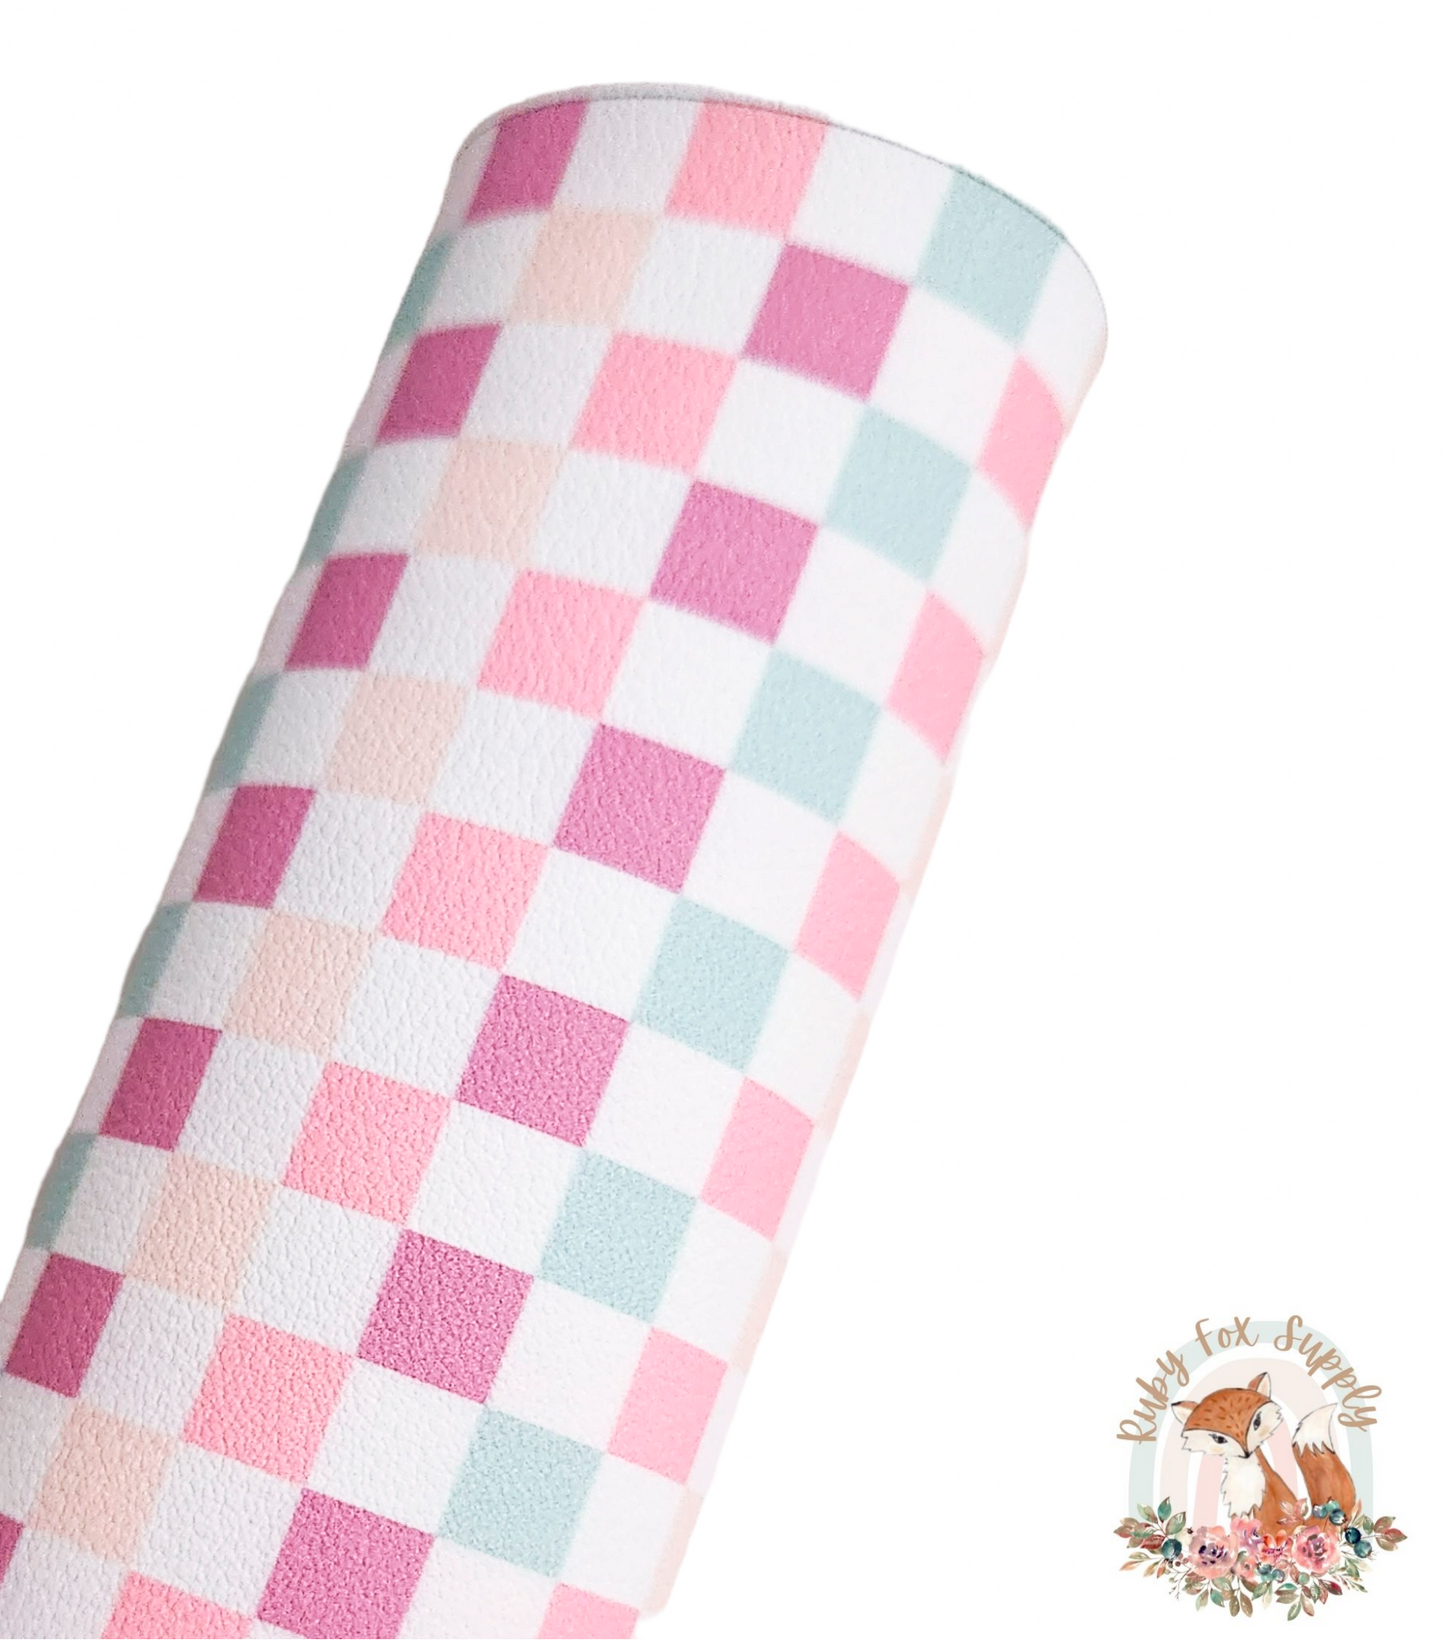 Pastel Checkers 9x12 faux leather sheet